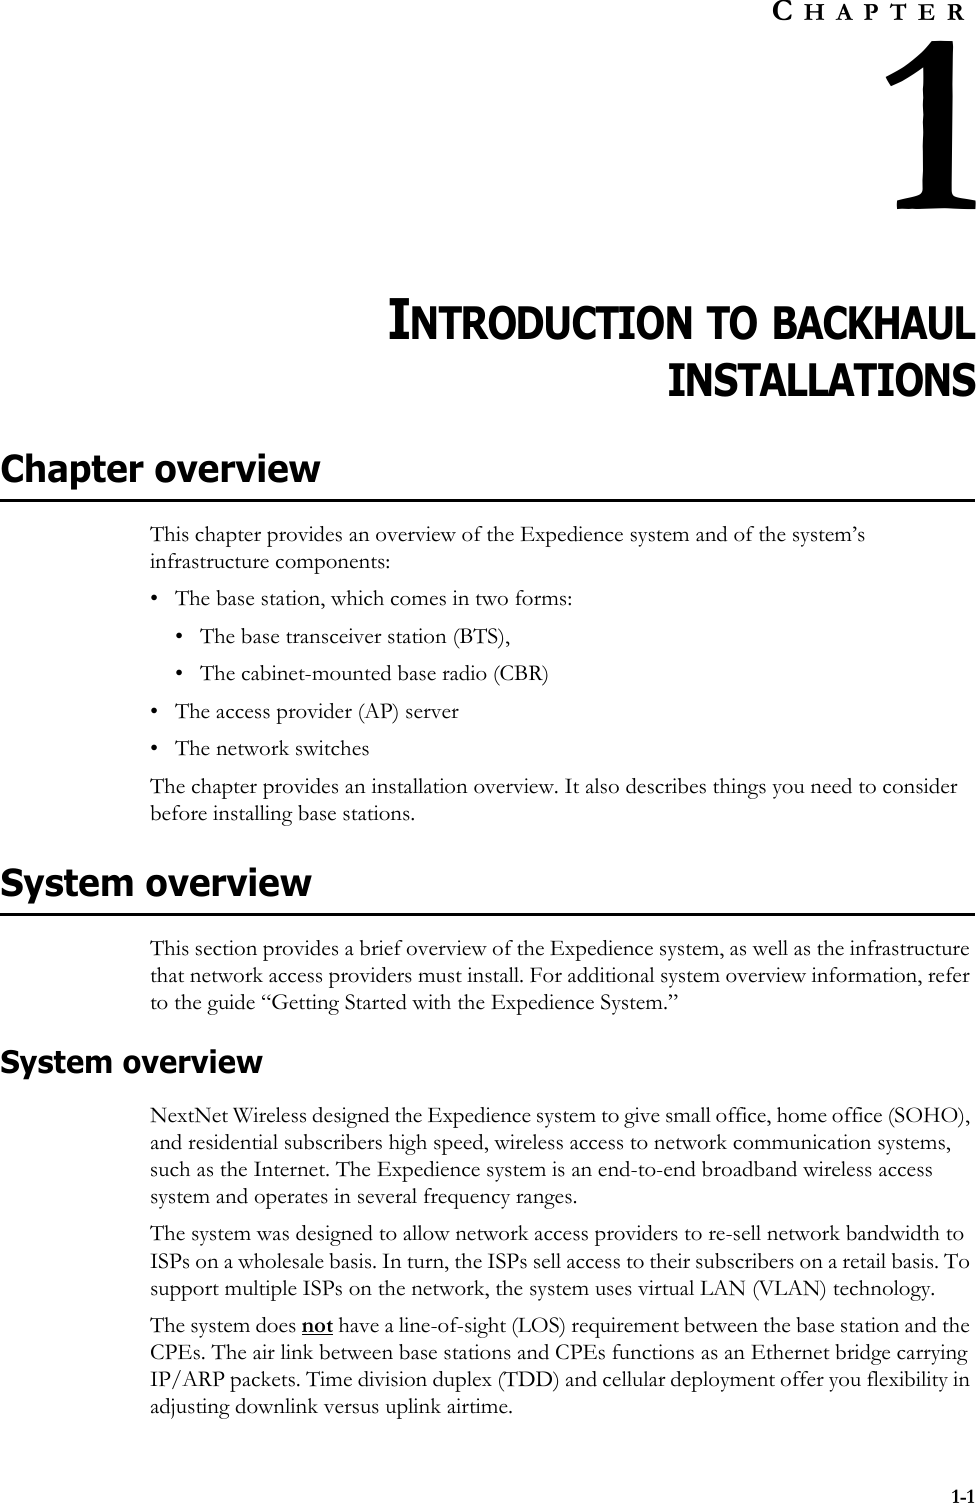 1-1CHAPTER1INTRODUCTION TO BACKHAULINSTALLATIONSChapter overviewThis chapter provides an overview of the Expedience system and of the system’s infrastructure components: • The base station, which comes in two forms:• The base transceiver station (BTS), • The cabinet-mounted base radio (CBR)• The access provider (AP) server• The network switchesThe chapter provides an installation overview. It also describes things you need to consider before installing base stations. System overviewThis section provides a brief overview of the Expedience system, as well as the infrastructure that network access providers must install. For additional system overview information, refer to the guide “Getting Started with the Expedience System.”System overviewNextNet Wireless designed the Expedience system to give small office, home office (SOHO), and residential subscribers high speed, wireless access to network communication systems, such as the Internet. The Expedience system is an end-to-end broadband wireless access system and operates in several frequency ranges. The system was designed to allow network access providers to re-sell network bandwidth to ISPs on a wholesale basis. In turn, the ISPs sell access to their subscribers on a retail basis. To support multiple ISPs on the network, the system uses virtual LAN (VLAN) technology. The system does not have a line-of-sight (LOS) requirement between the base station and the CPEs. The air link between base stations and CPEs functions as an Ethernet bridge carrying IP/ARP packets. Time division duplex (TDD) and cellular deployment offer you flexibility in adjusting downlink versus uplink airtime. 